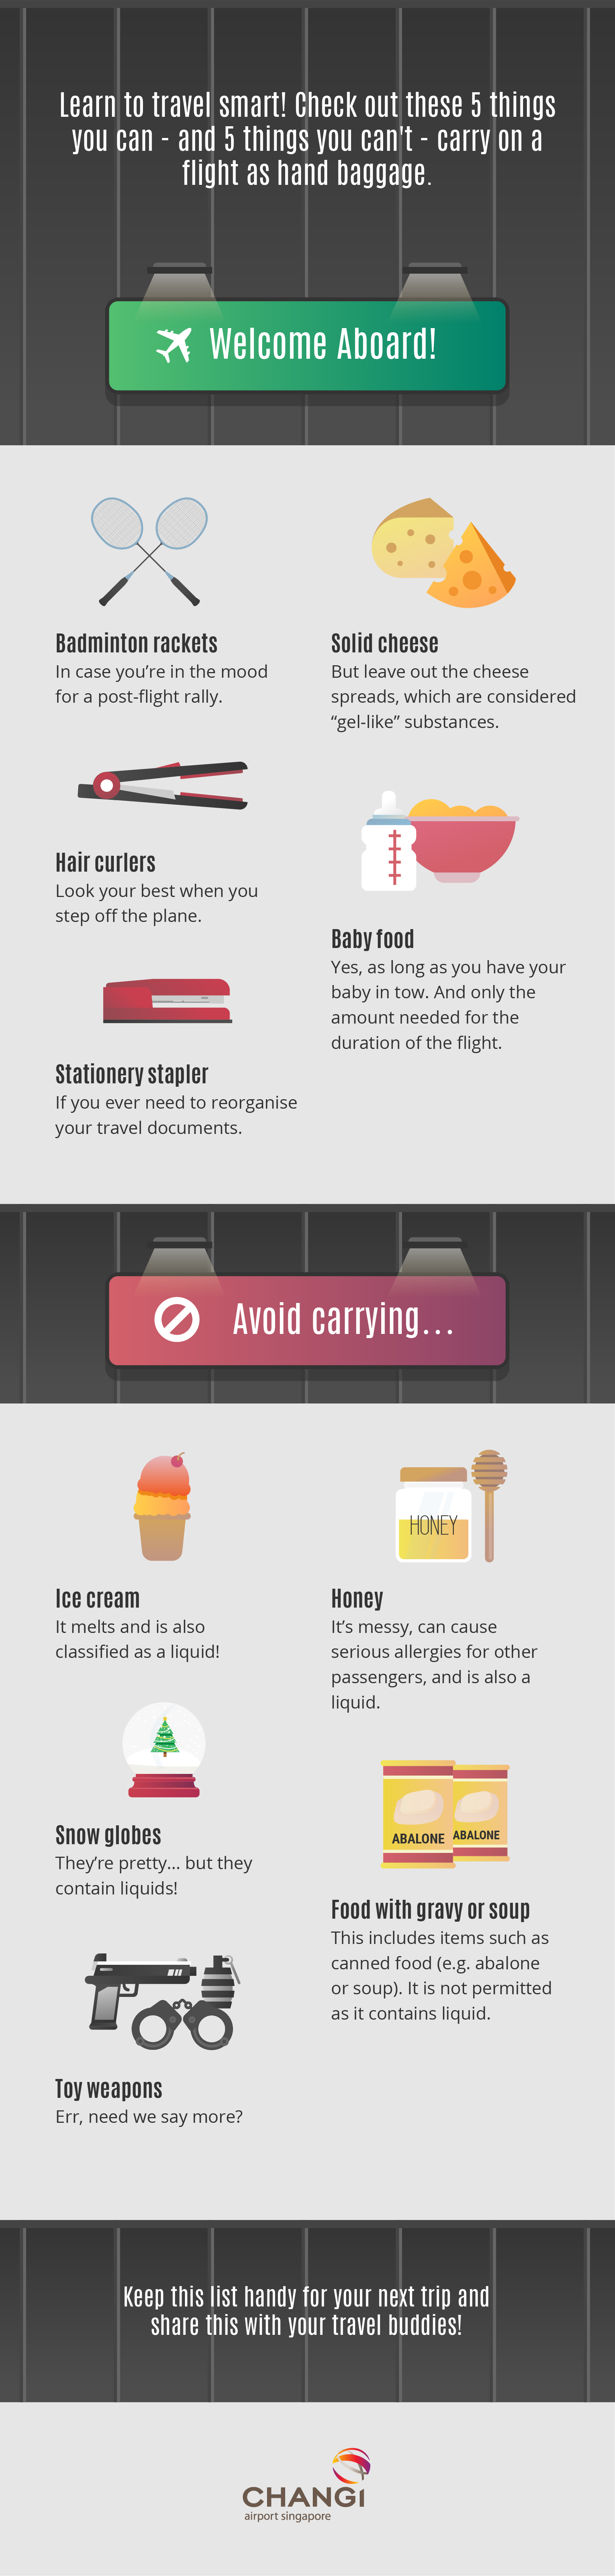 Can or cannot: 5 things you can (and 5 things you can't) bring on a flight  as carry-on baggage